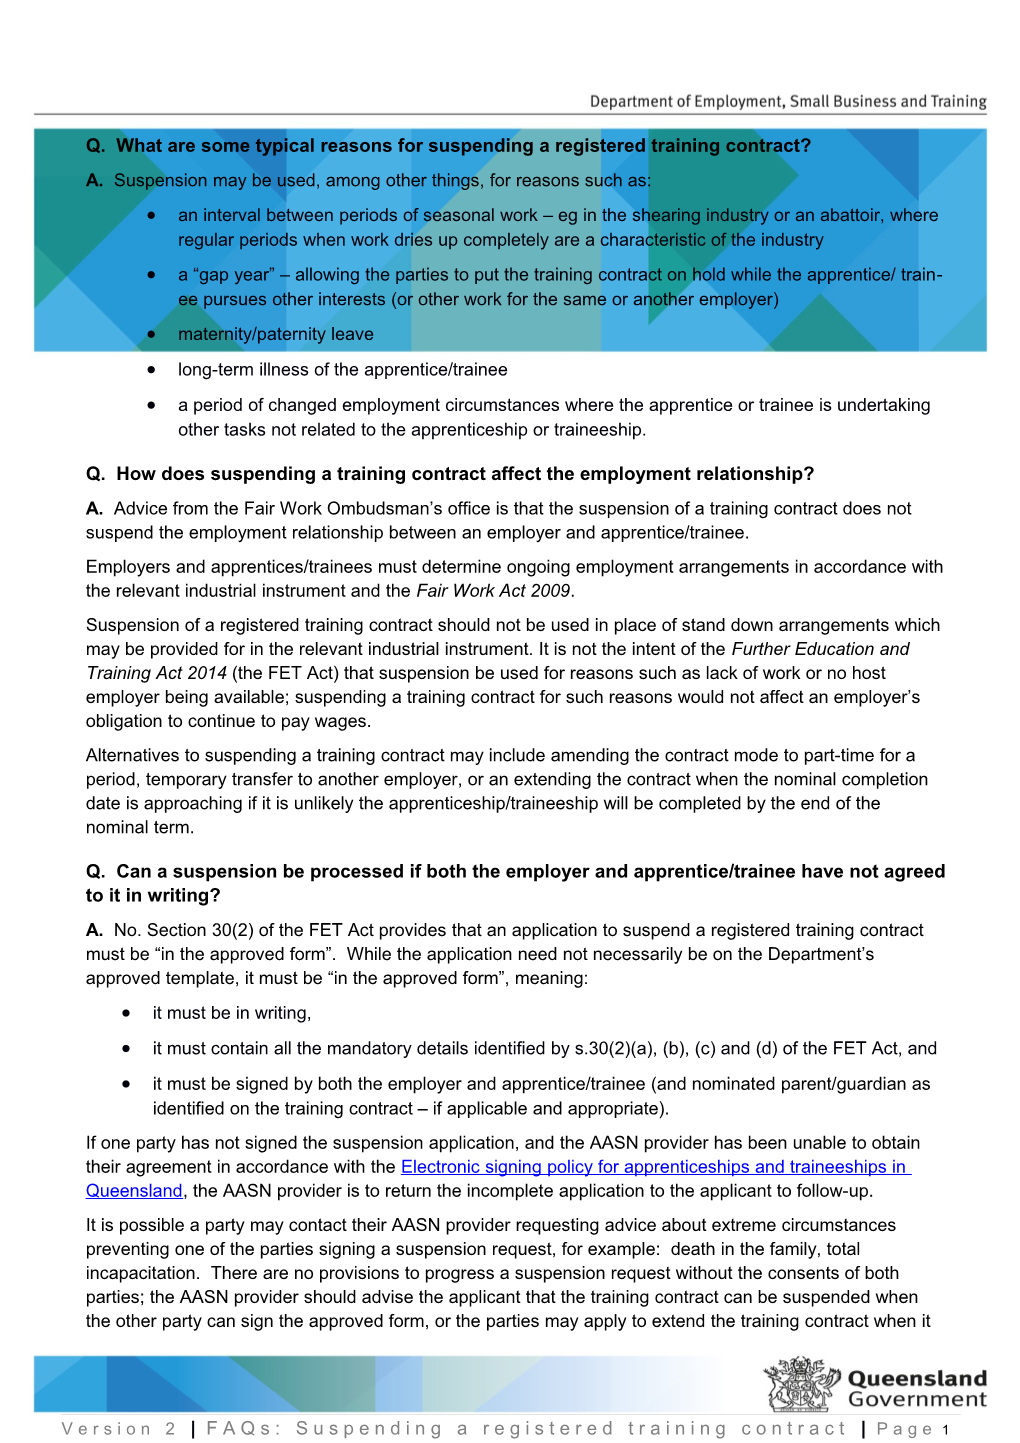 Faqs for AASN Providers - Suspending a Registered Training Contract